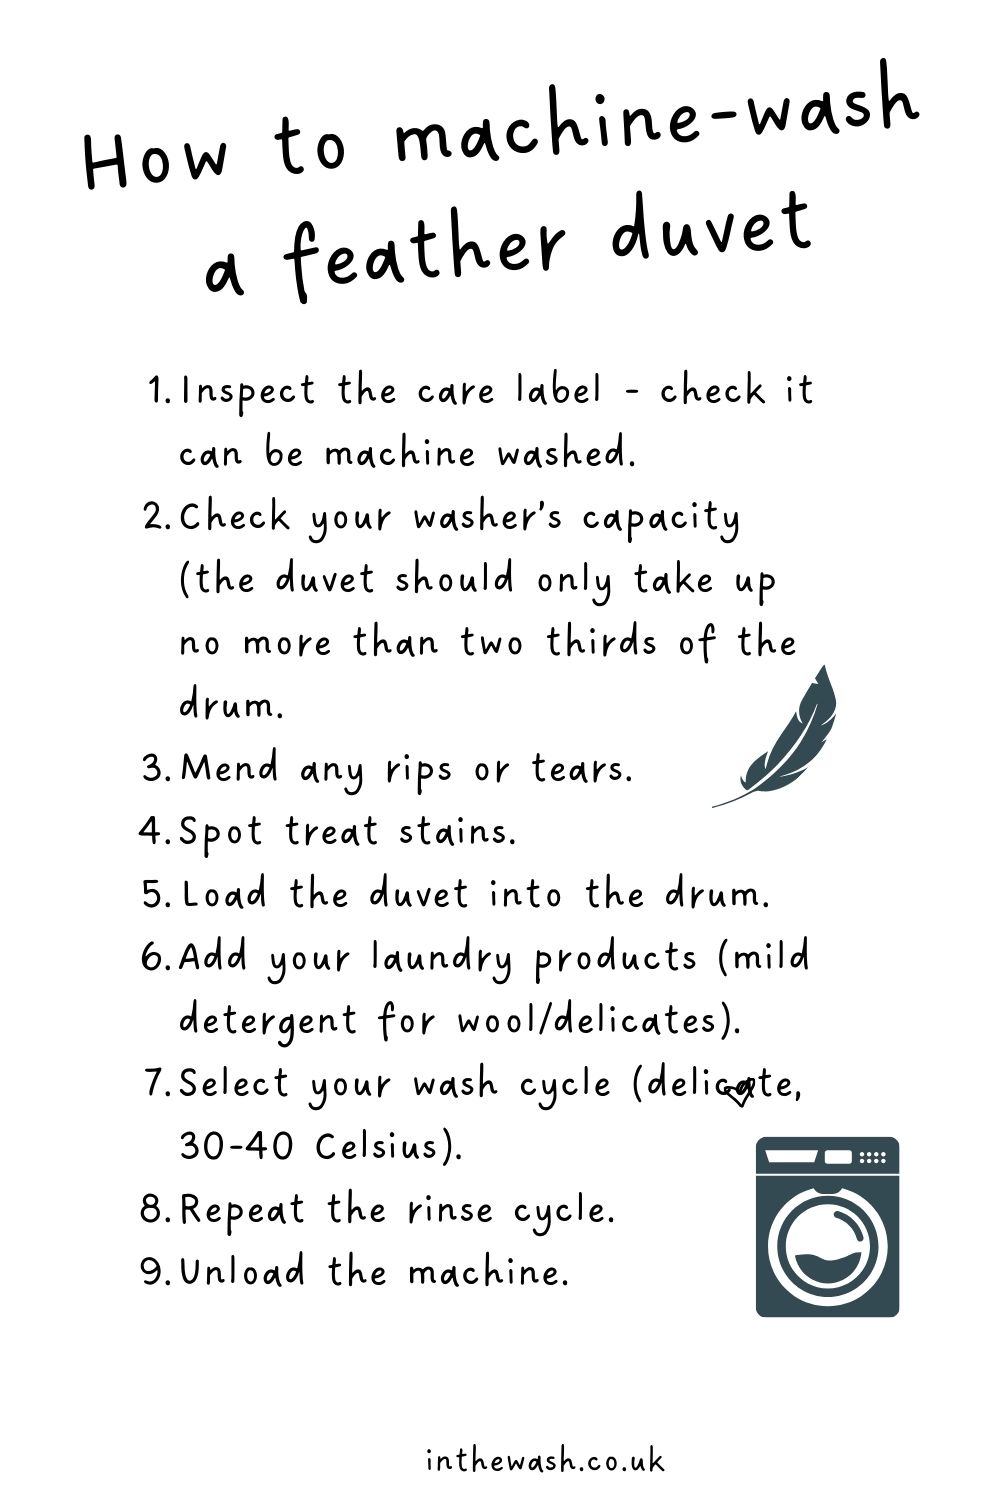 How to machine-wash a feather duvet